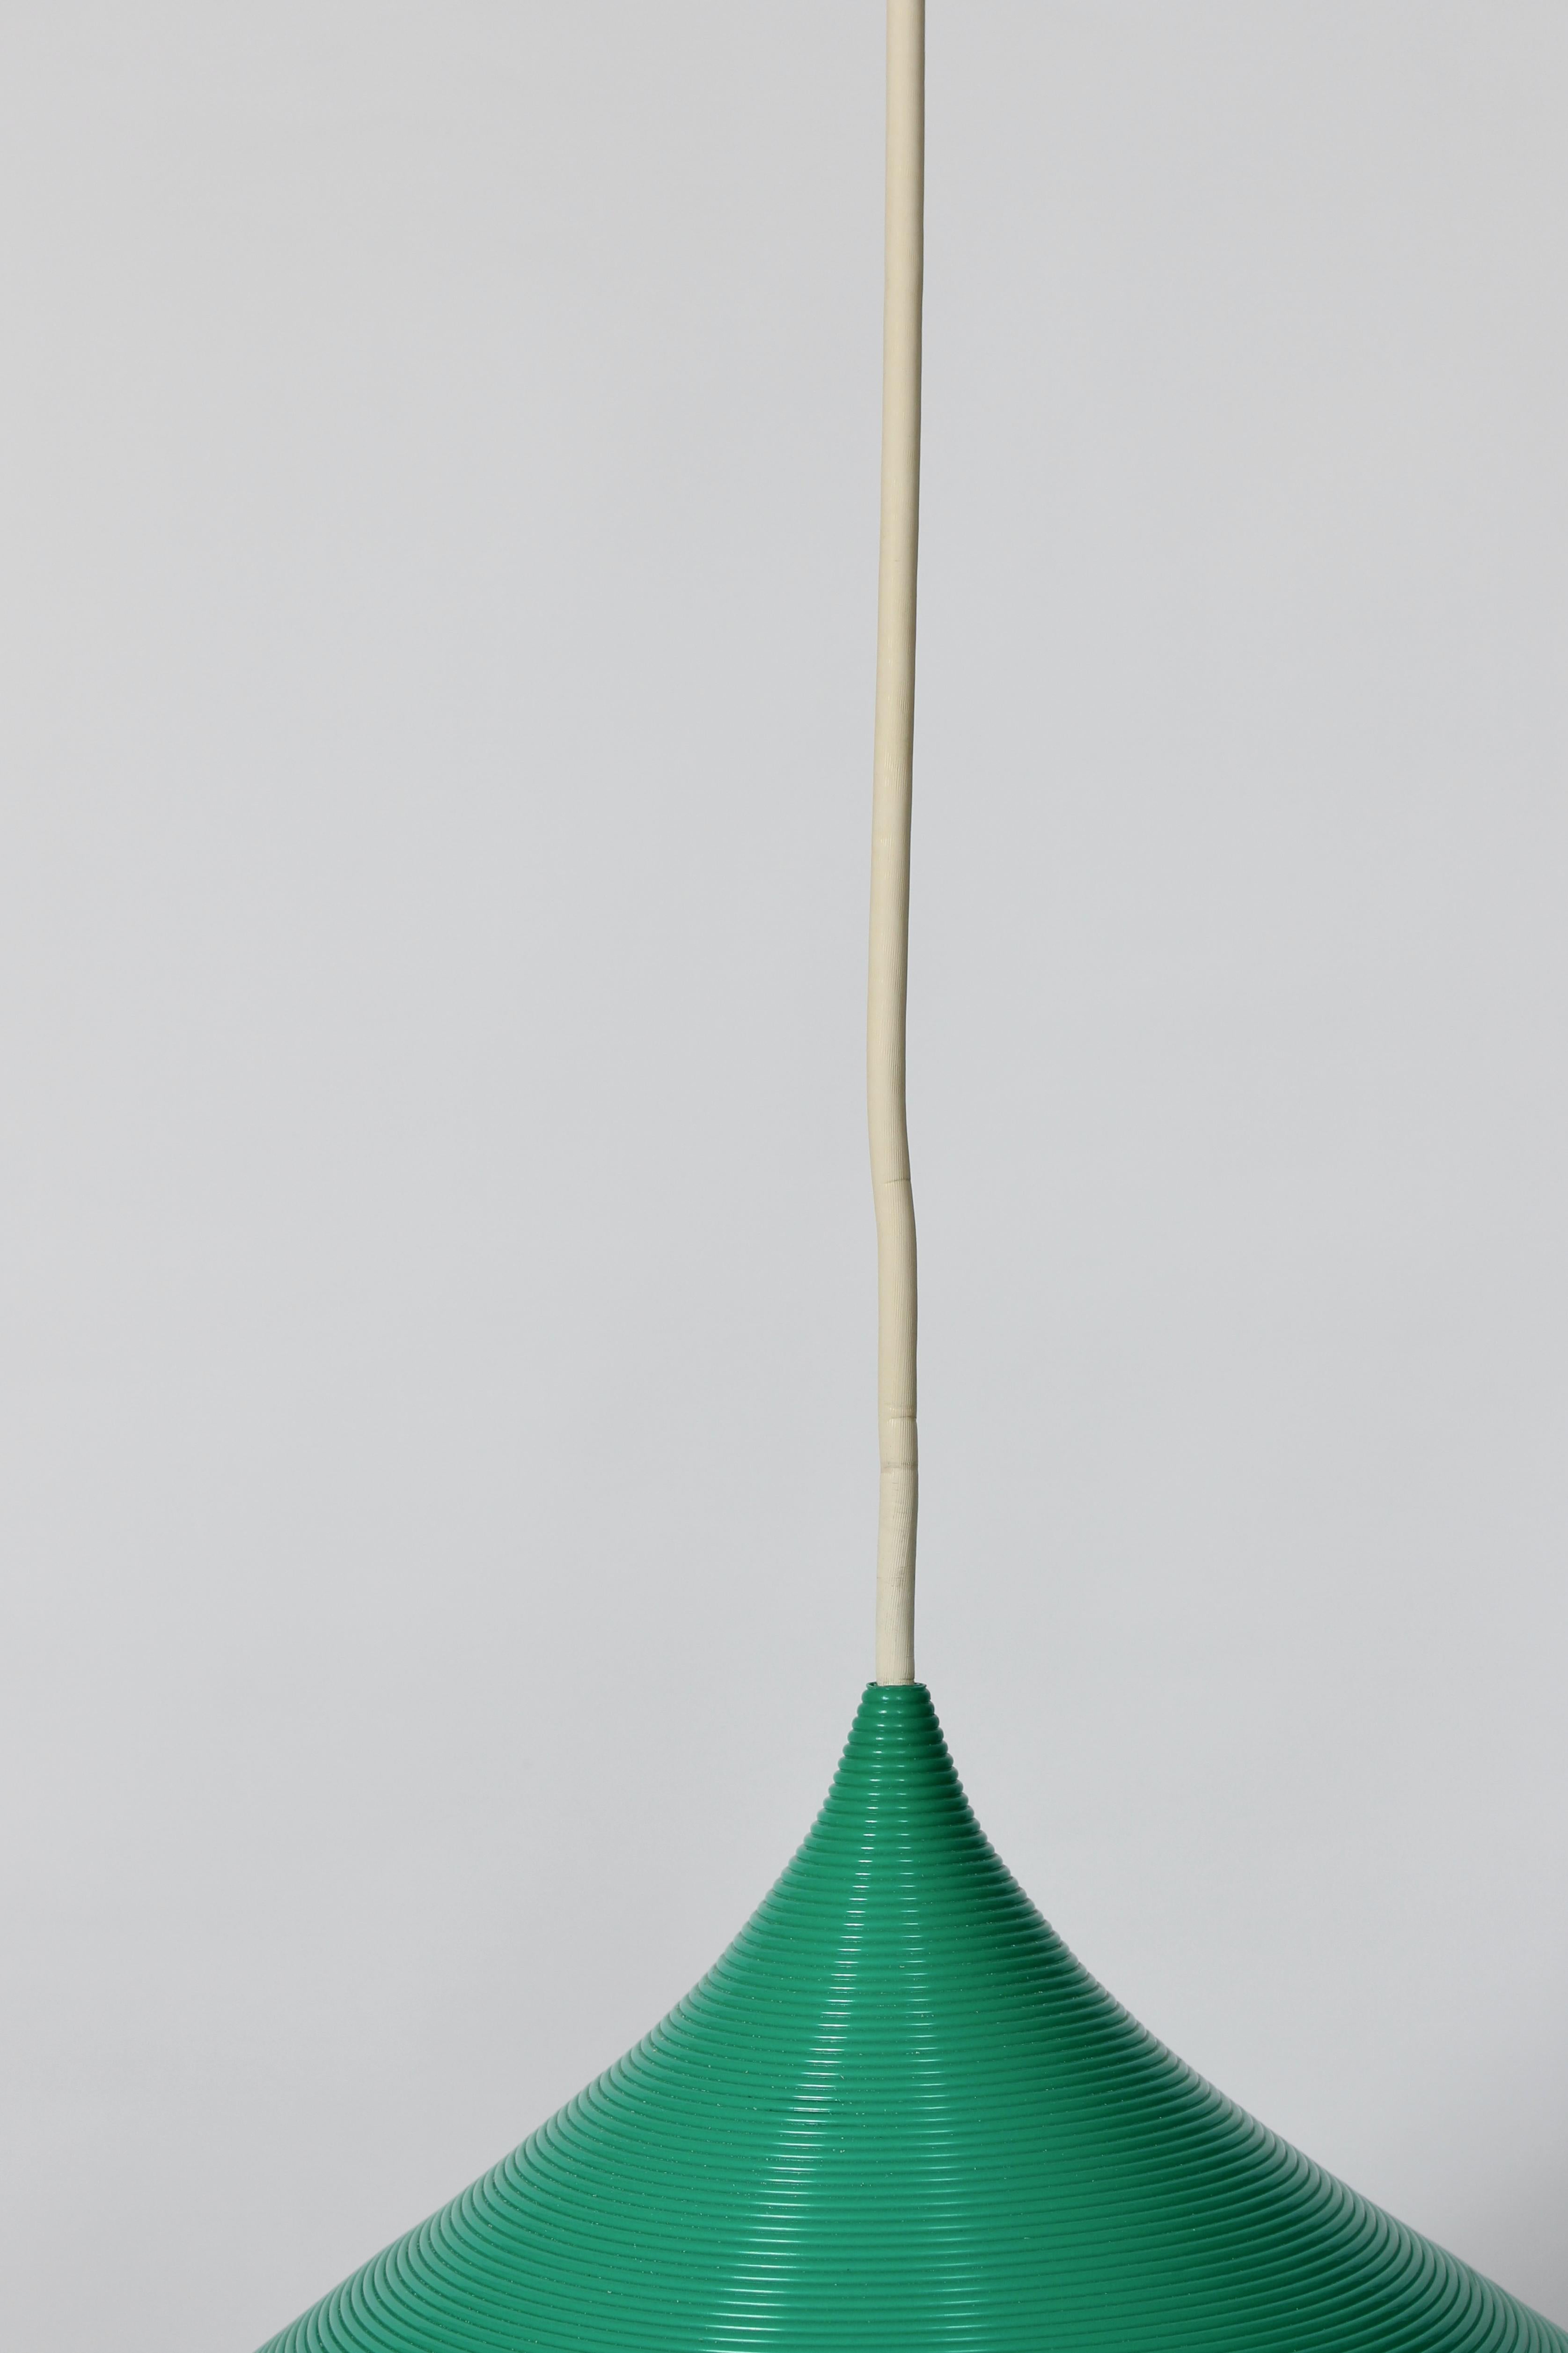 Glowtek Rotaflex Kelly Green hanging ceiling light by John and Sylvia Reid. Featuring one piece of continual spun smooth ridged Green plastic cord forming a wide teardrop shape, 3.5D opening, standard ceramic socket (up to 100 watts) with original